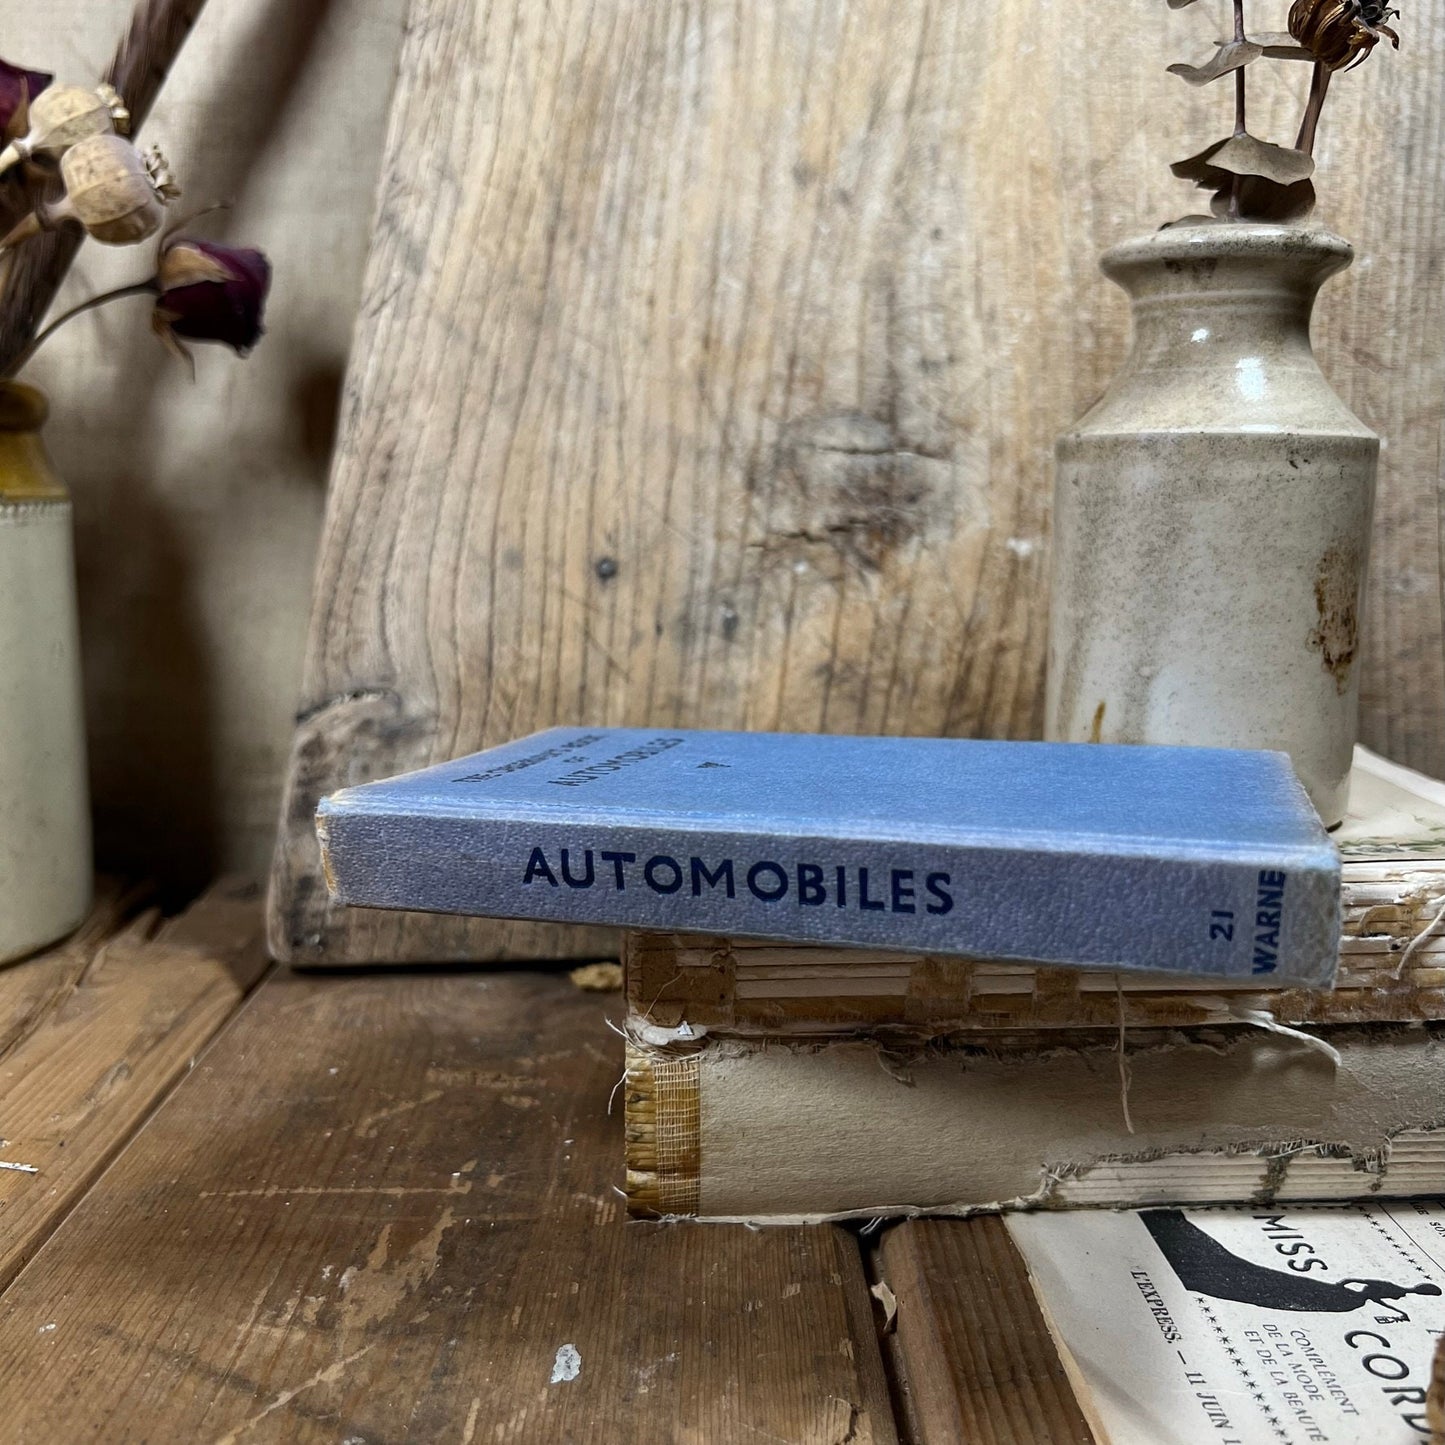 The observer’s book of Automobiles Light Cover Top - Bottom